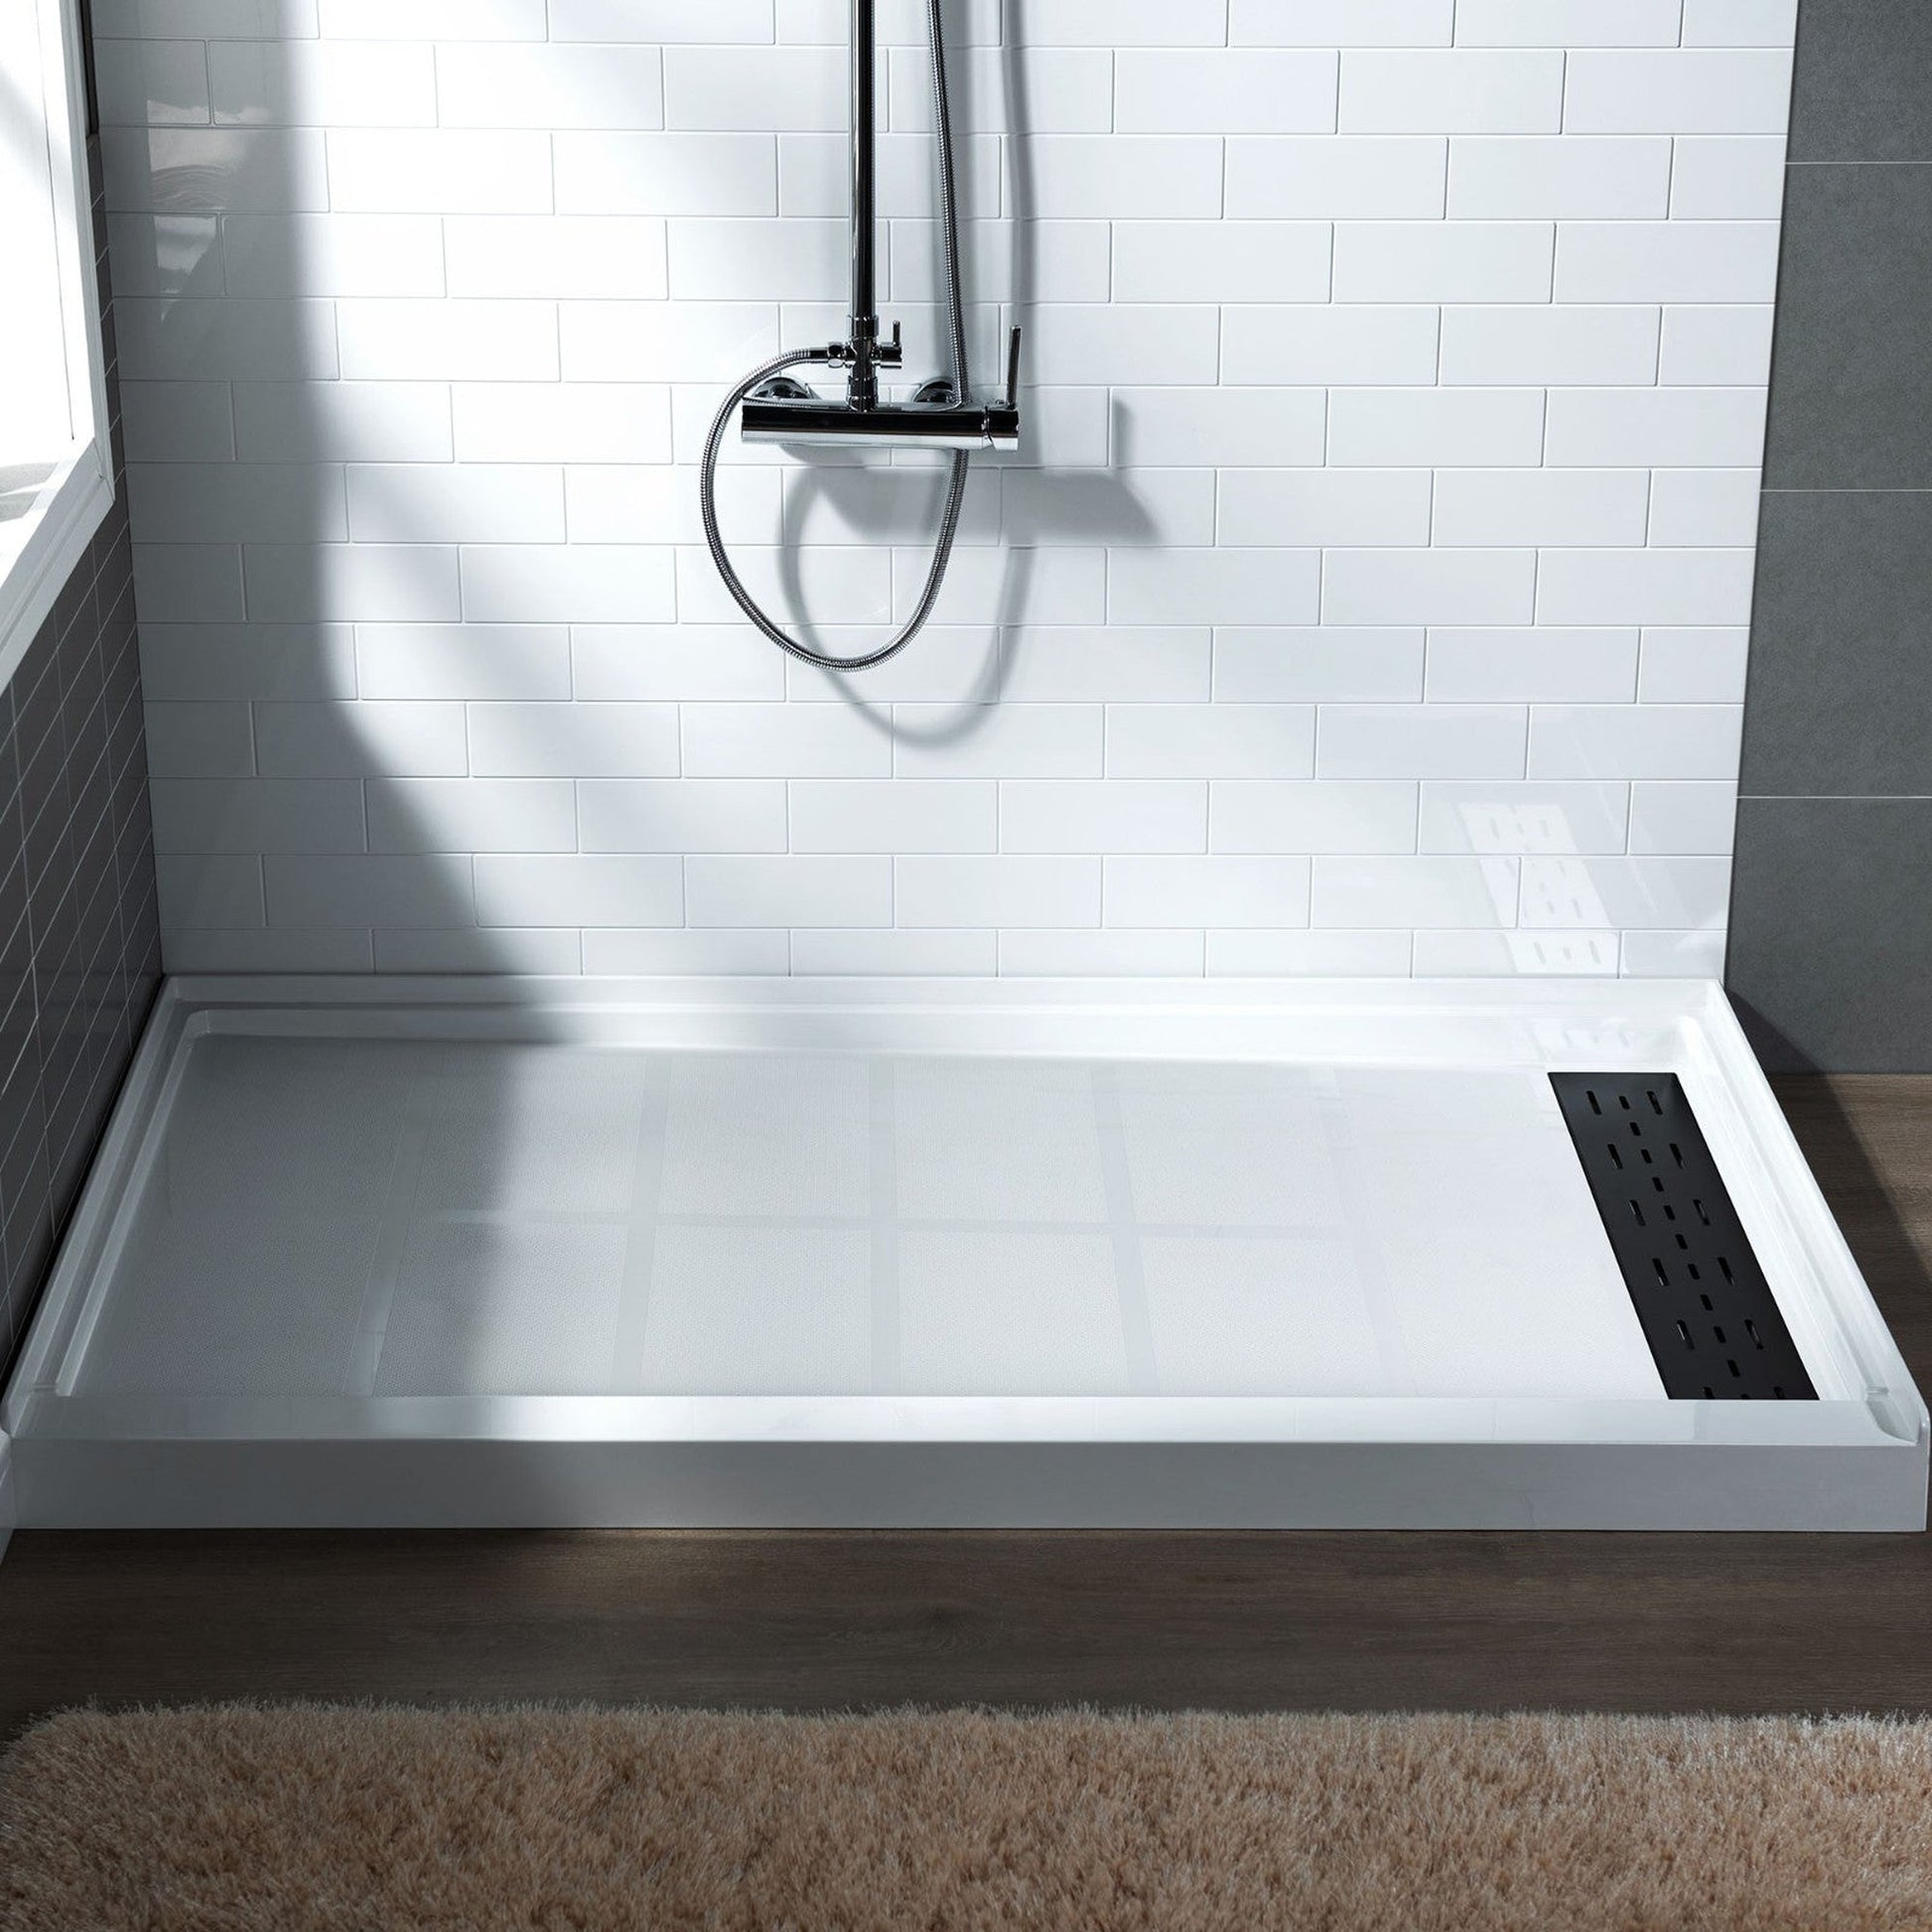 WoodBridge 60" x 30" White Solid Surface Shower Base Right Drain Location With Matte Black Trench Drain Cover